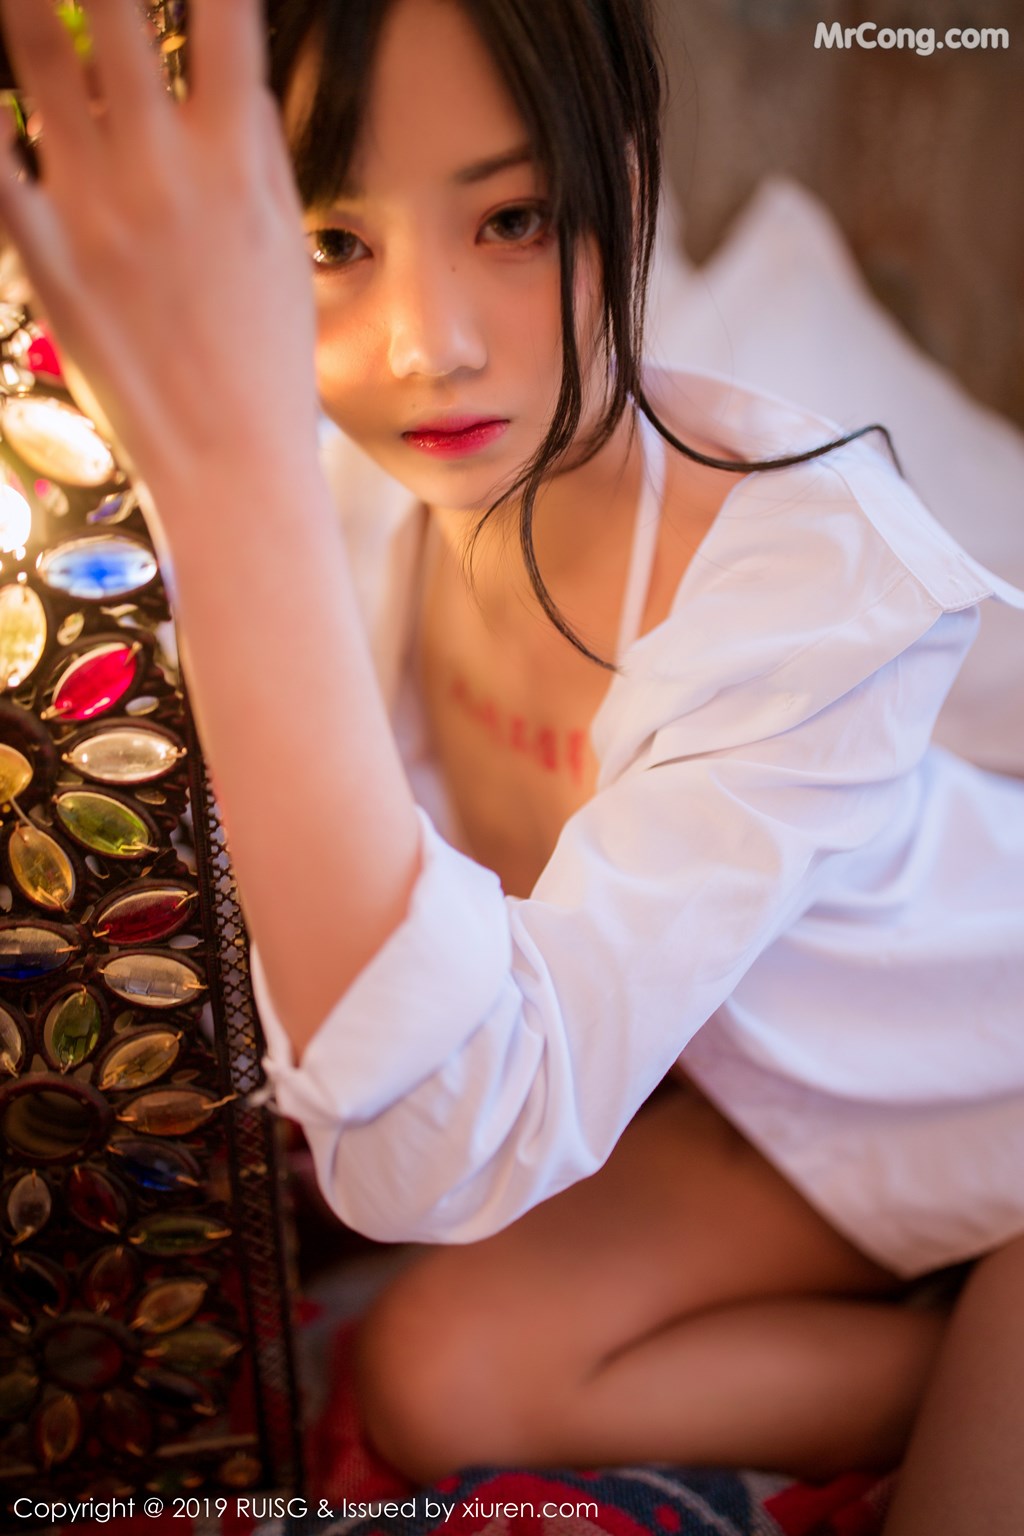 RuiSG Vol.087: 人间 不 值得 lily (43 pictures) photo 2-2